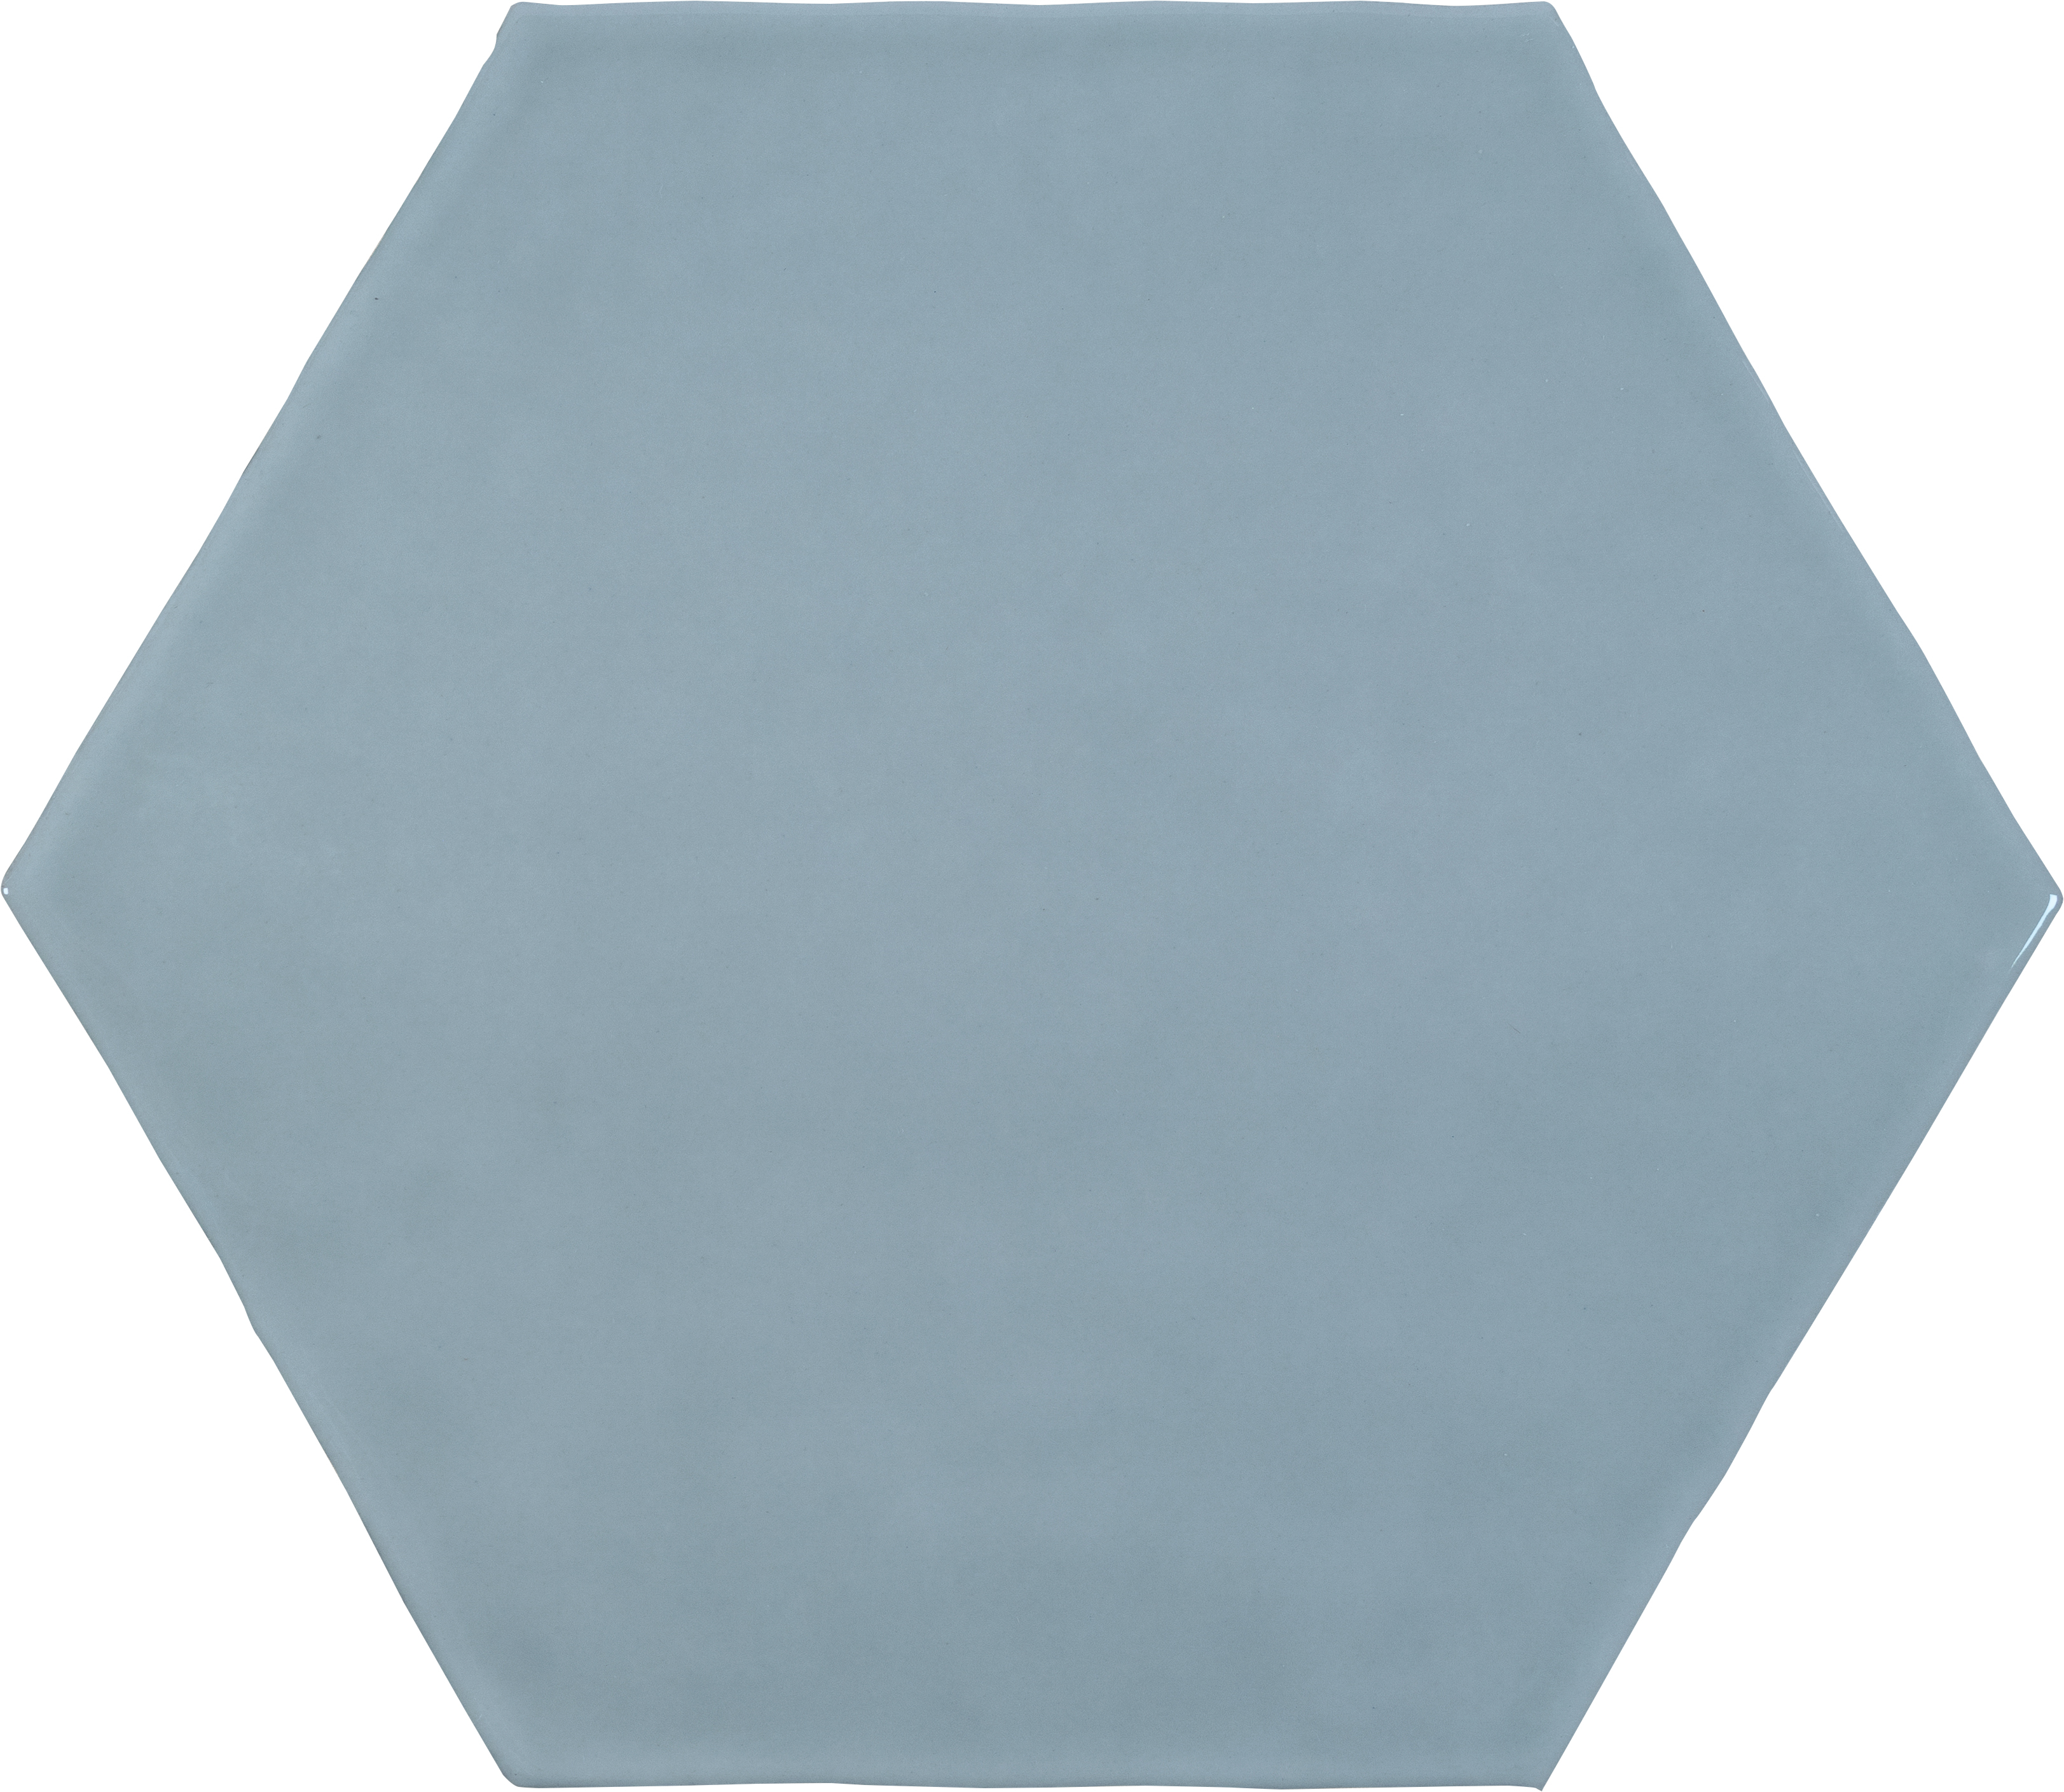 sky pattern glazed ceramic field tile from teramoda anatolia collection distributed by surface group international glossy finish pressed edge 6-inch hexagon shape